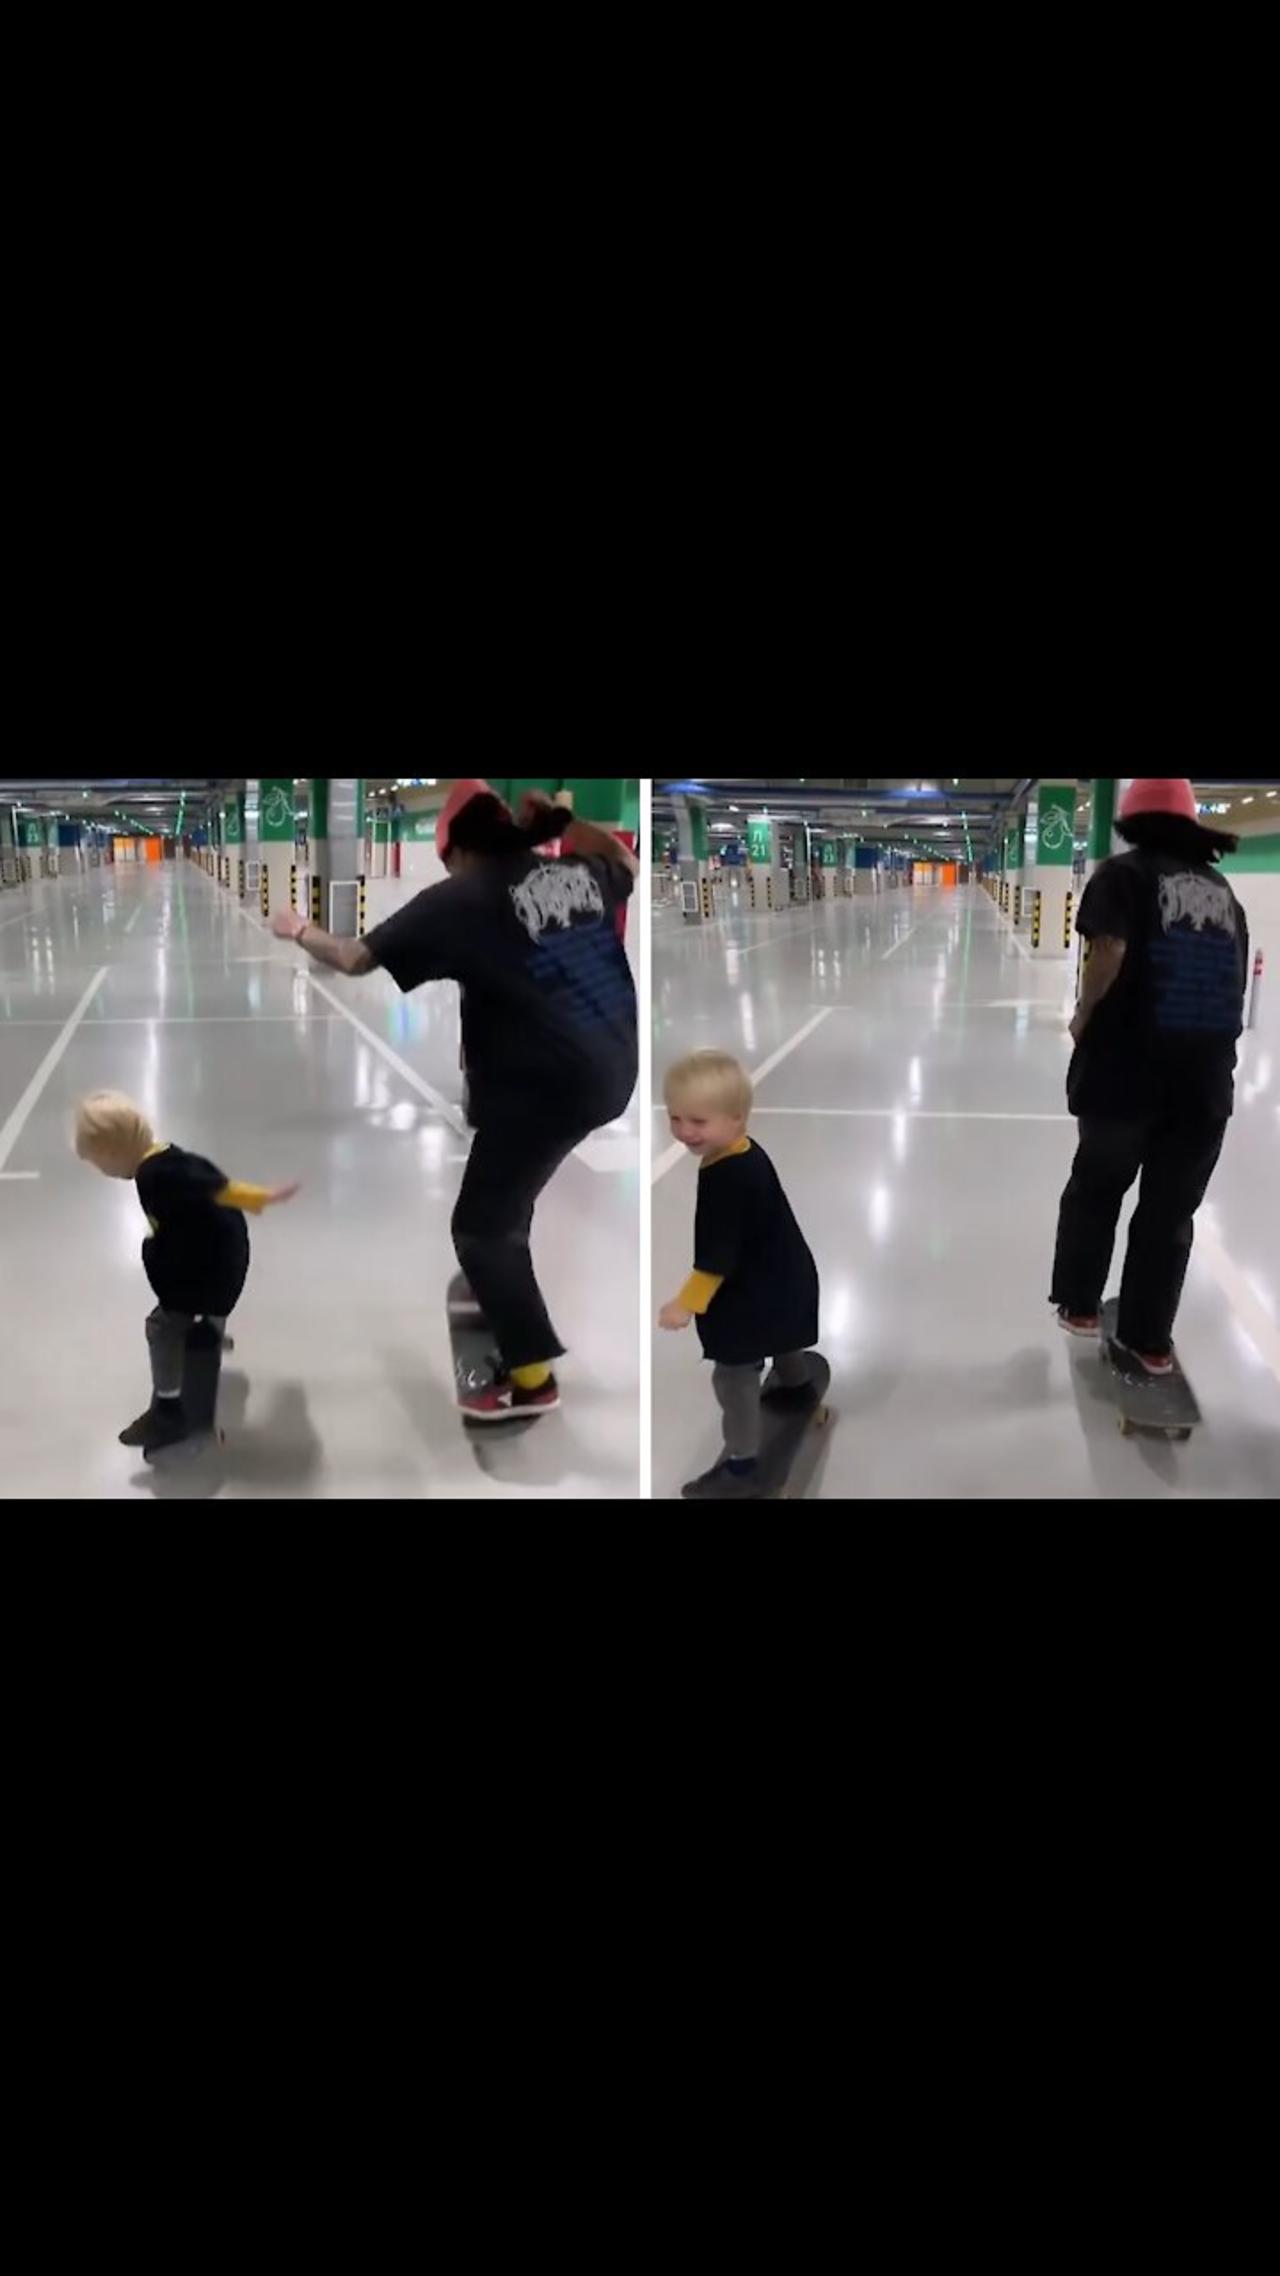 Mom & 3-year-old son show off their incredible skateboarding skills